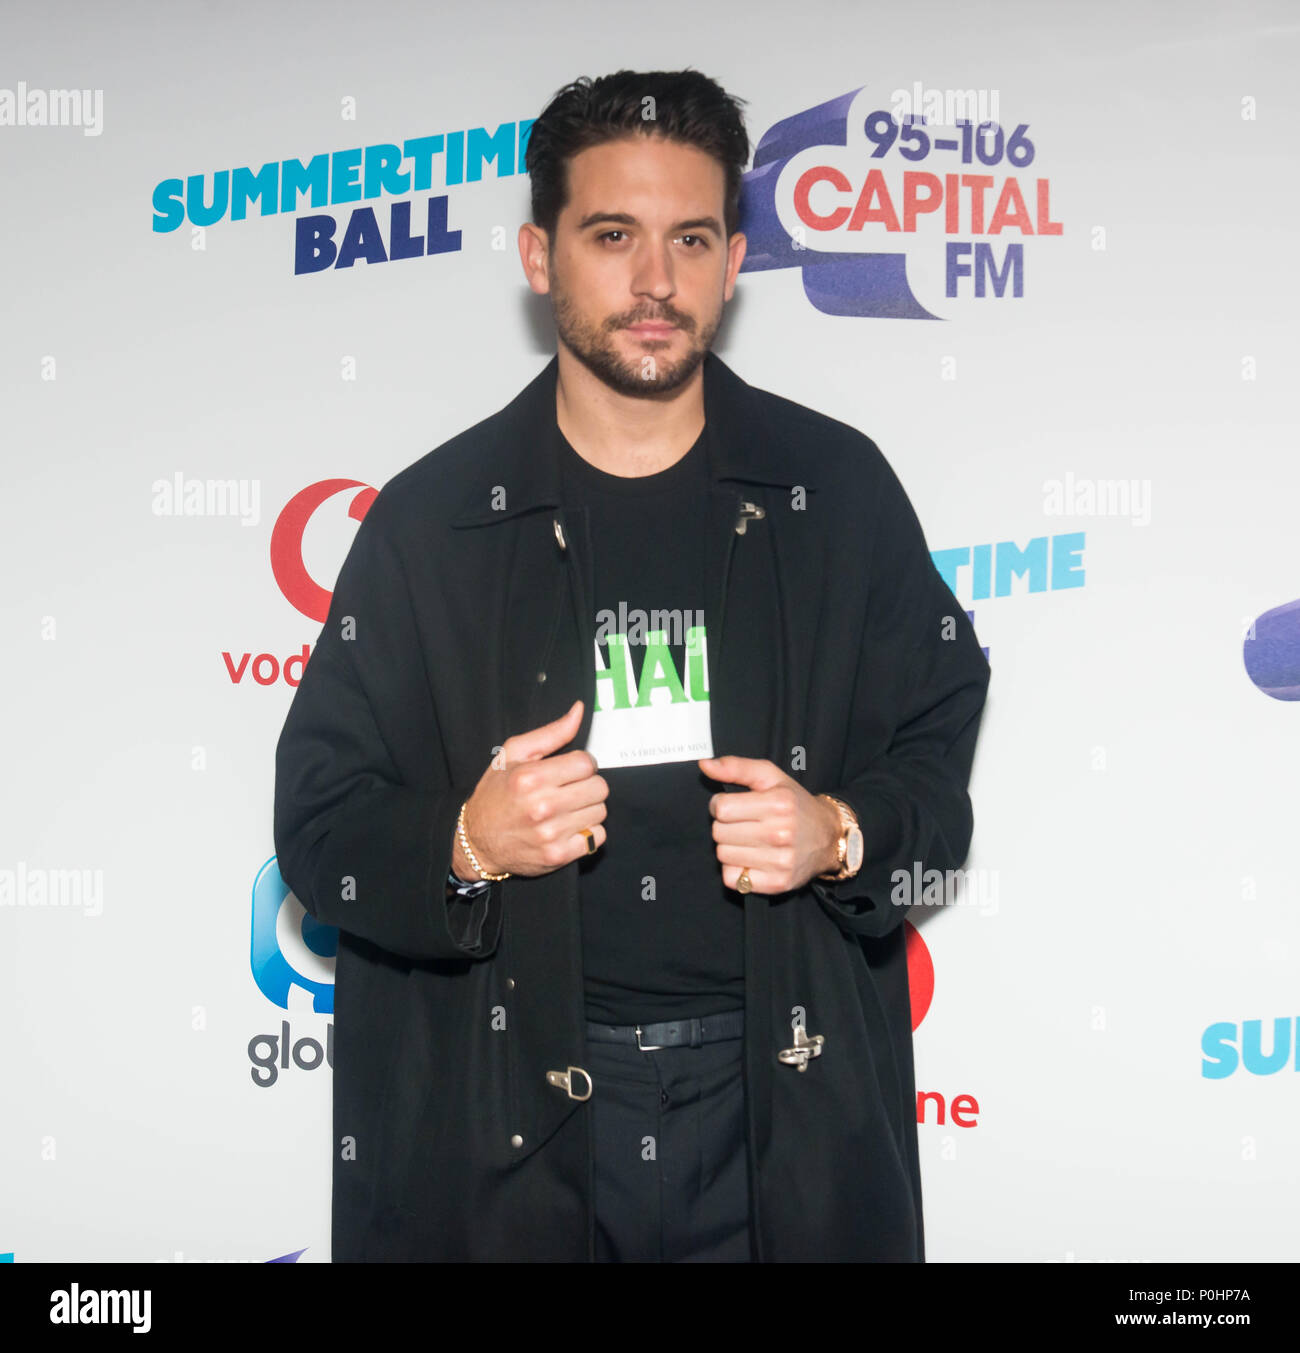 Wembley, United Kingdom. 9th June 2018.   at Capital’s Summertime Ball with Vodafone at London’s Wembley Stadium. The sell-out event saw performances from this summer’s hottest artists Camila Cabello, Shawn Mendes, Rita Ora, Charlie Puth, Jess Glynne, Craig David, Anne-Marie, Rudimental, Sean Paul, Clean Bandit, James Arthur, Sigala, Years & Years, Jax Jones, Raye, Jonas Blue, Mabel, Stefflon Don, Yungen and G-Eazy.     Michael Tubi/ Alamy Live News Stock Photo